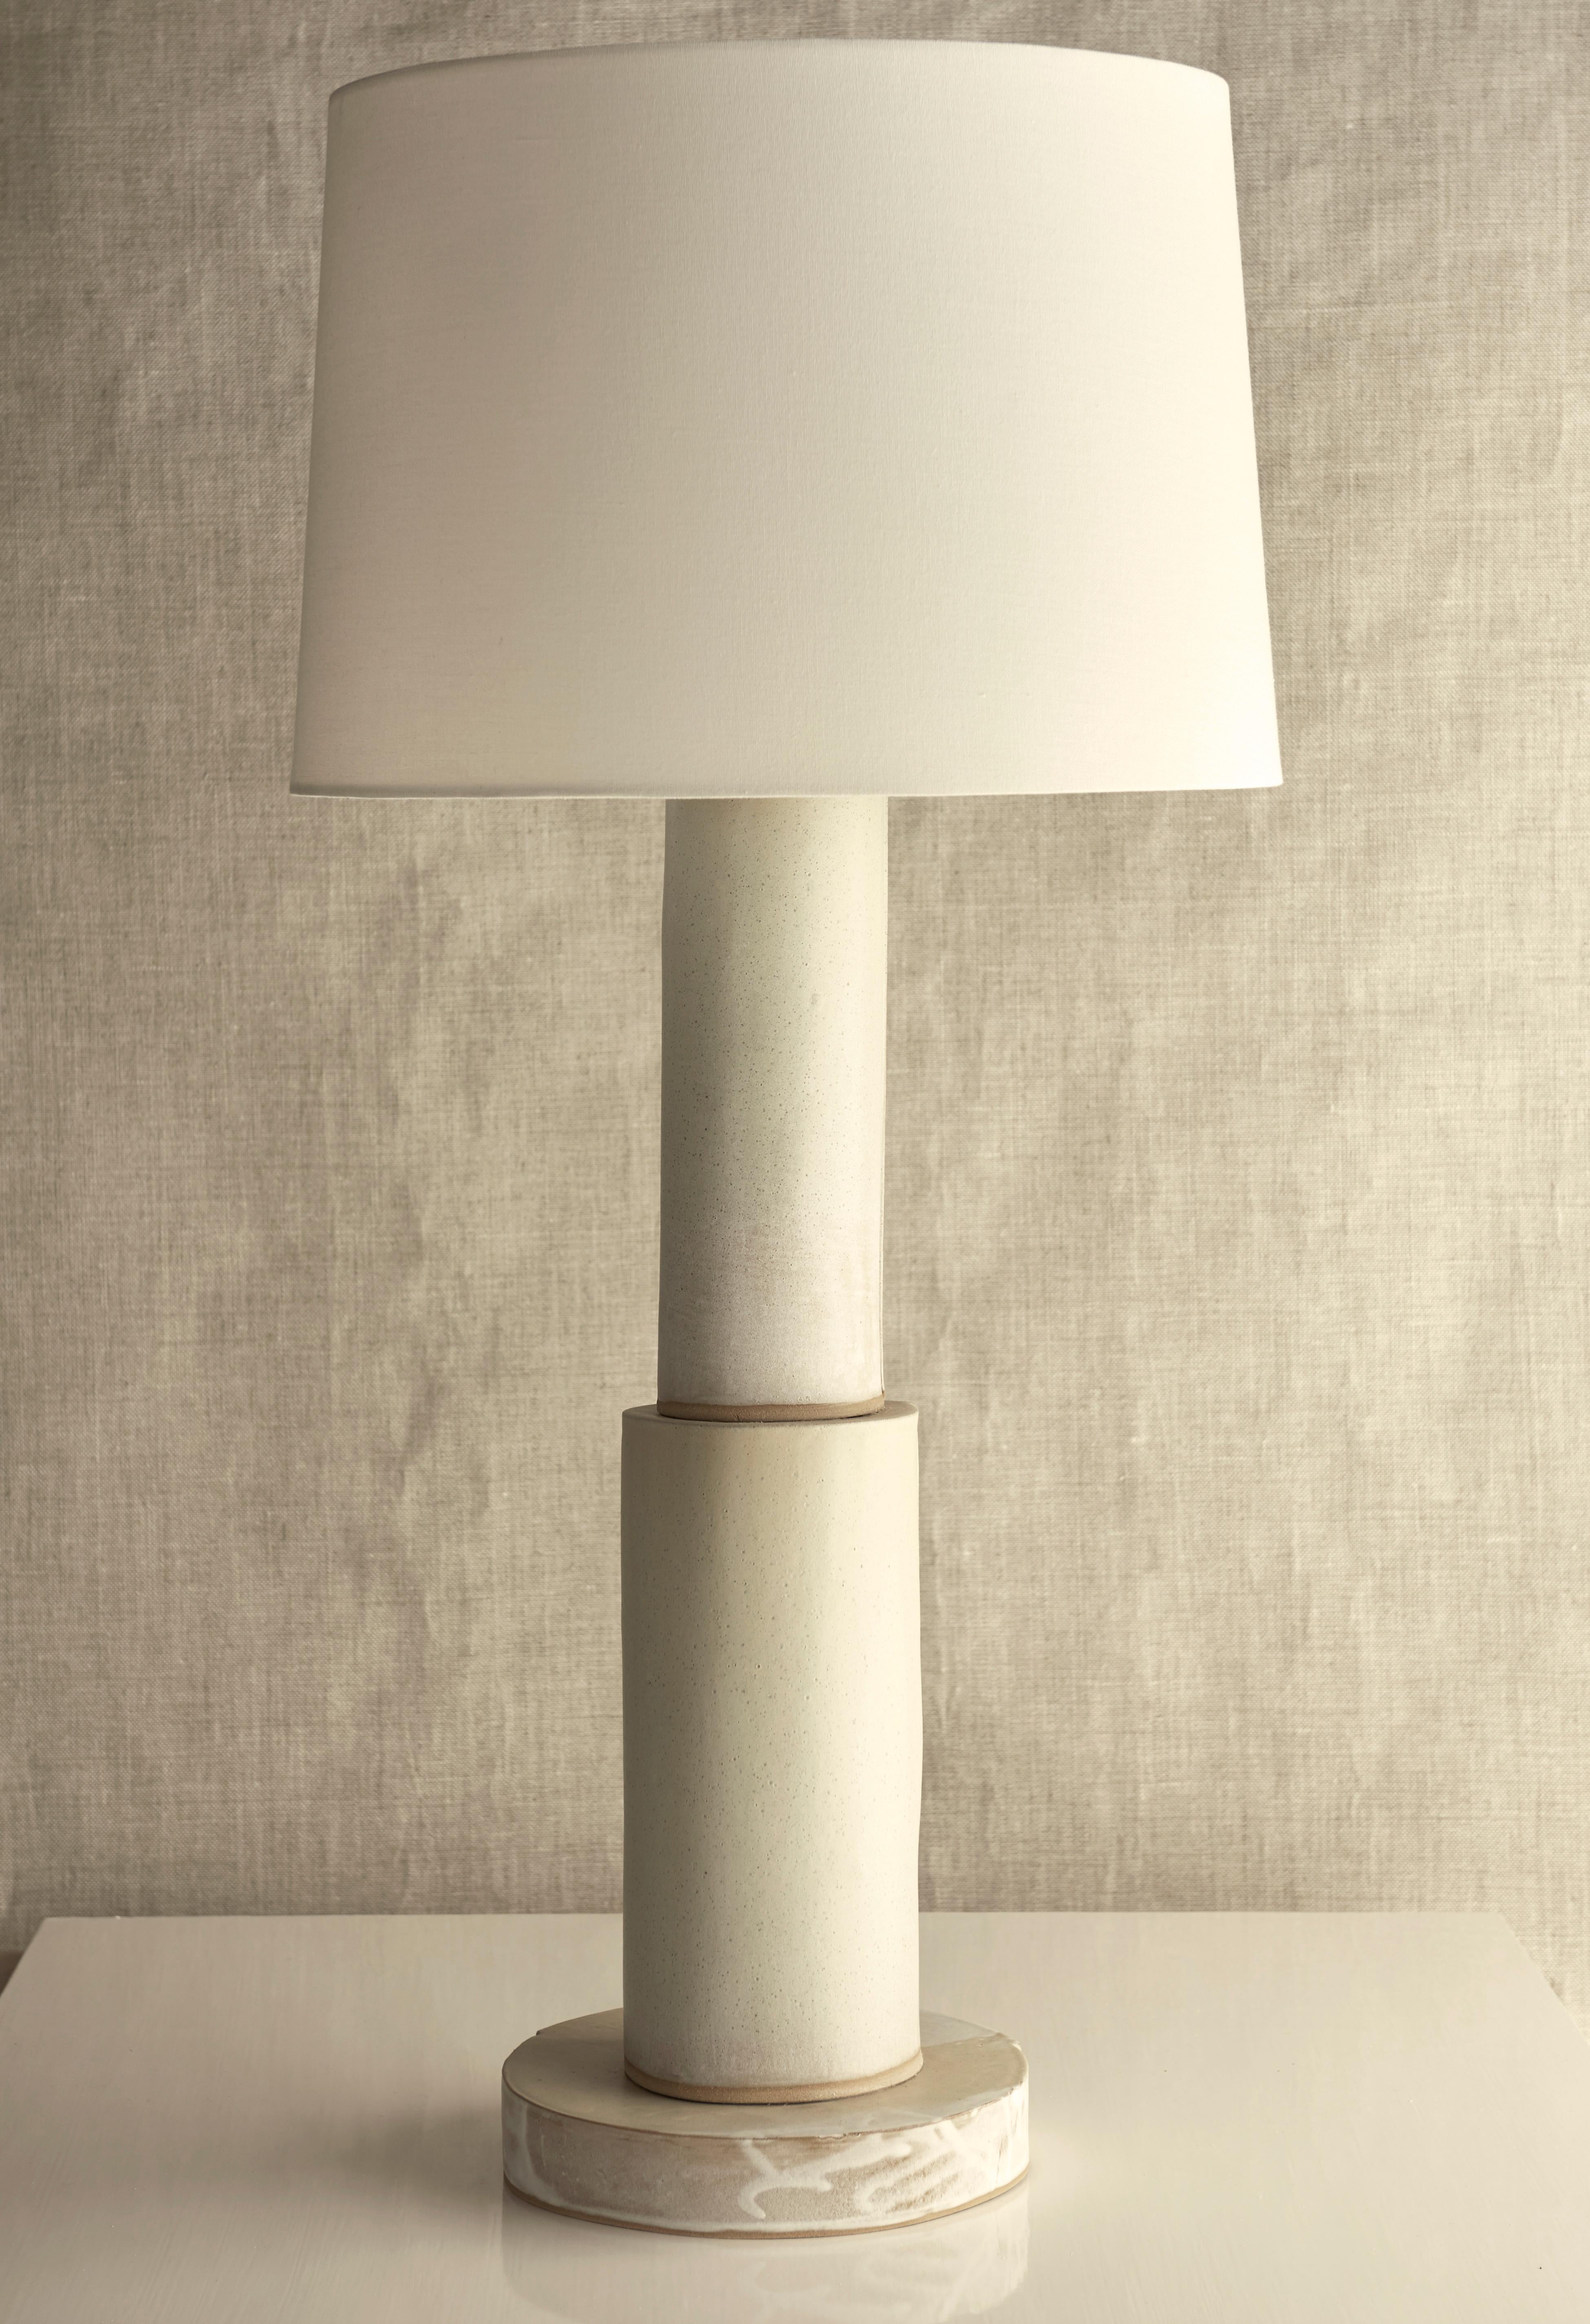 Fired Studio Lamp, Ceramic Sculptural Table Lamp by Dumais Made